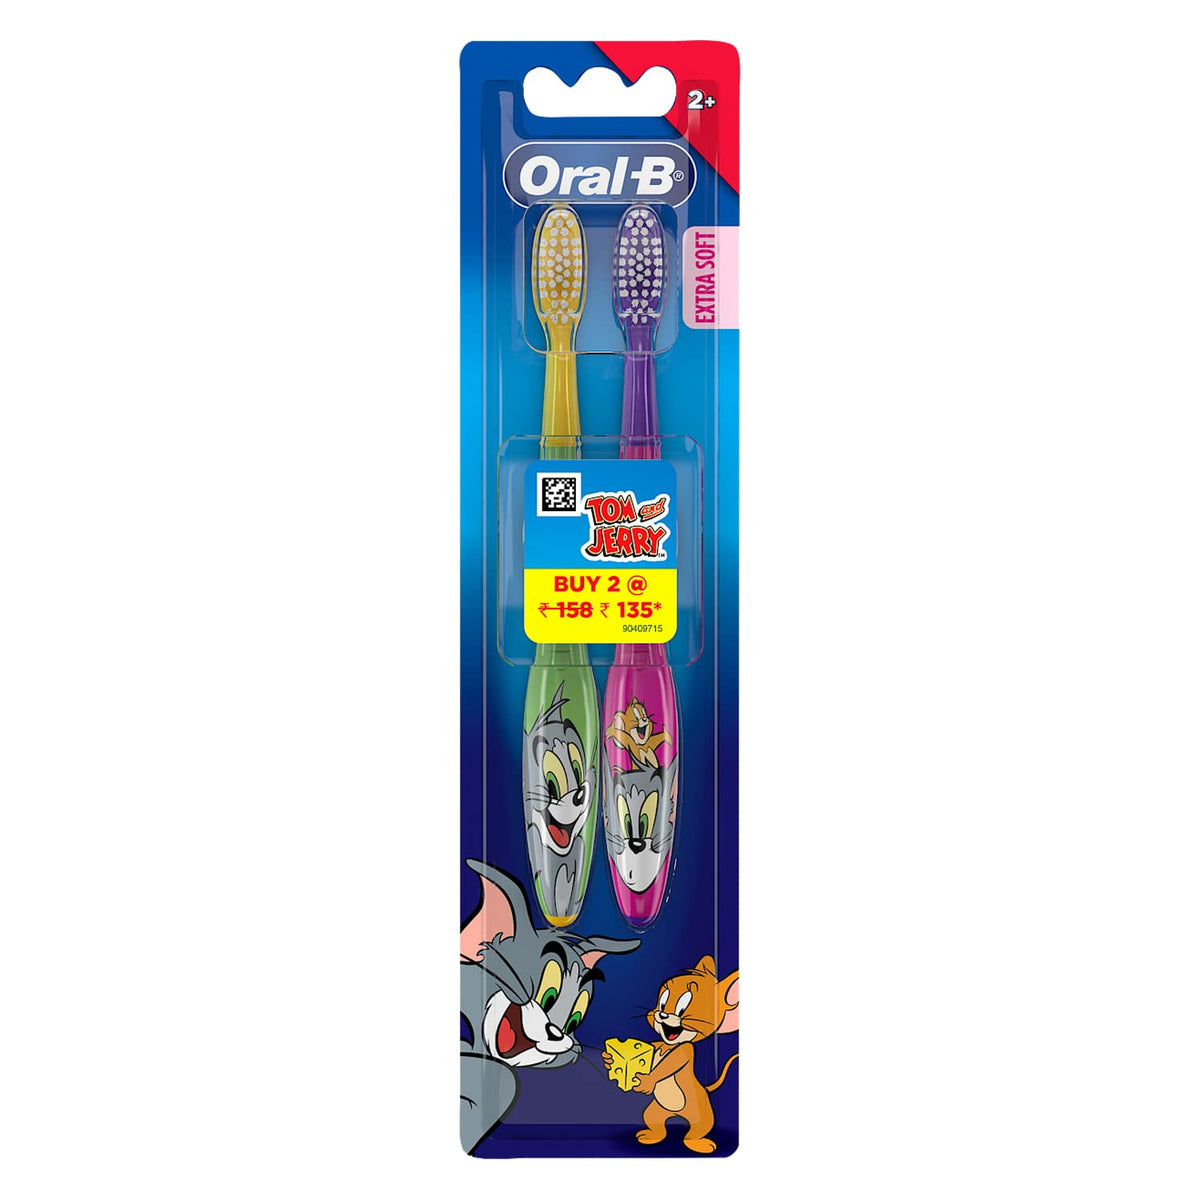 Shop in Sri Lanka for Oral B Kids Toothbrush, Tom & Jerry, Extra soft bristles and easy to hold handle (Age 2+) Pack of 2 - Manual Toothbrushes from Oral B - Shop at Selekt